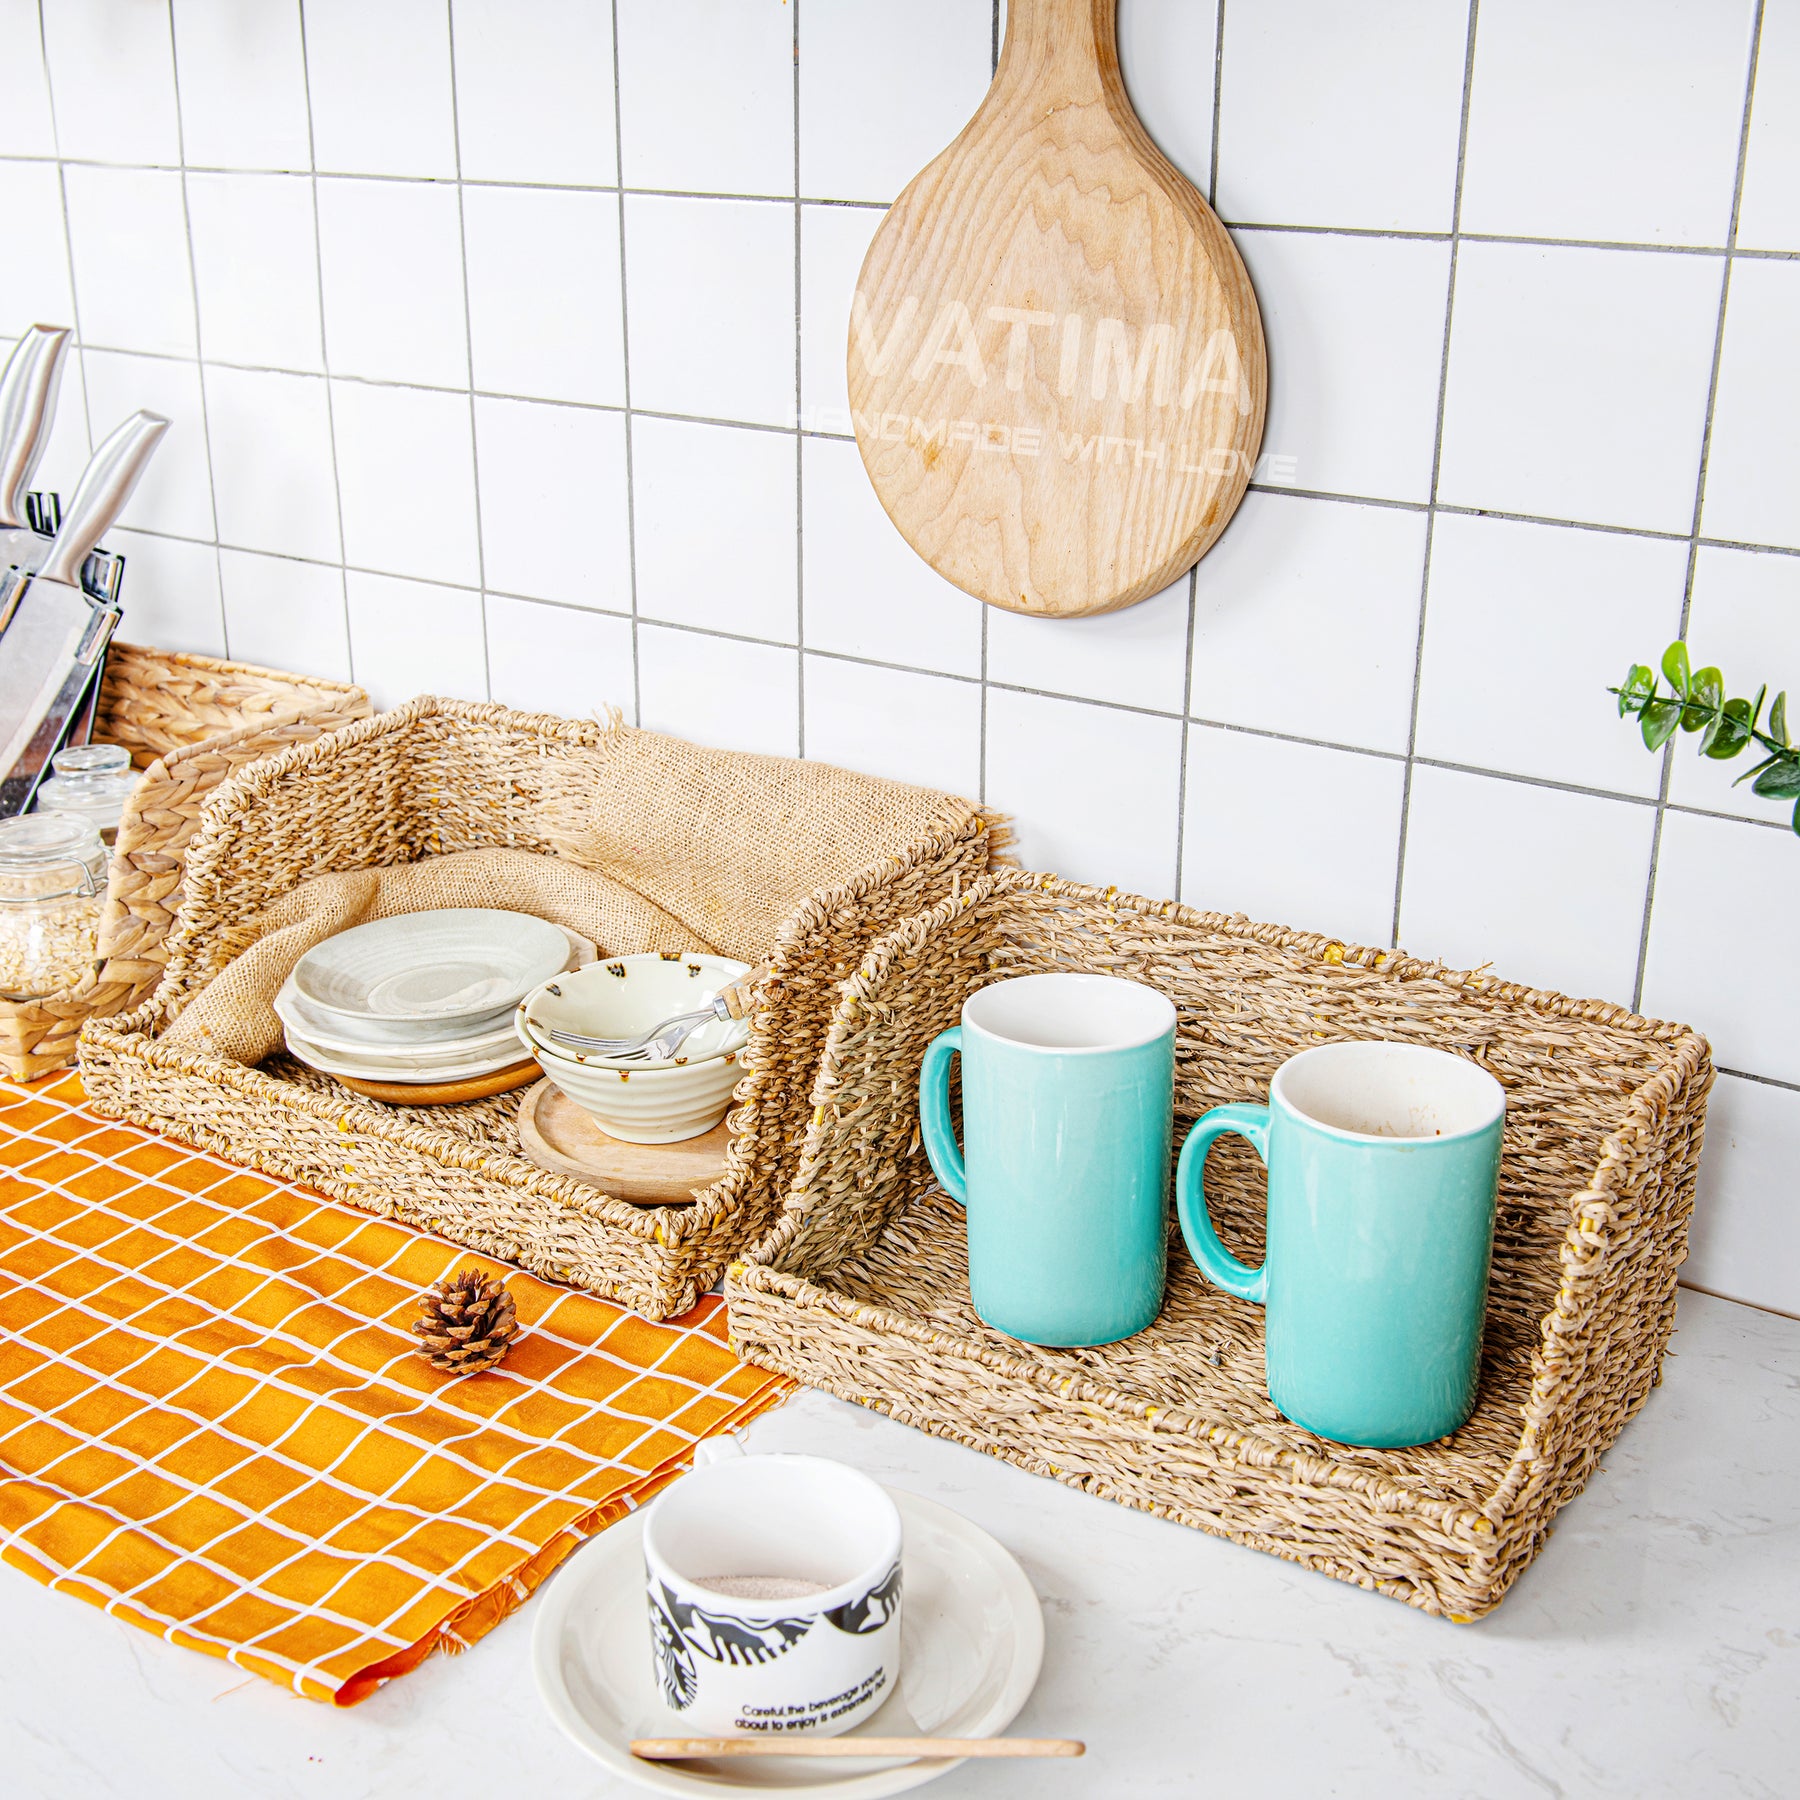 The Benefits of Using Wicker Baskets for Home Organization